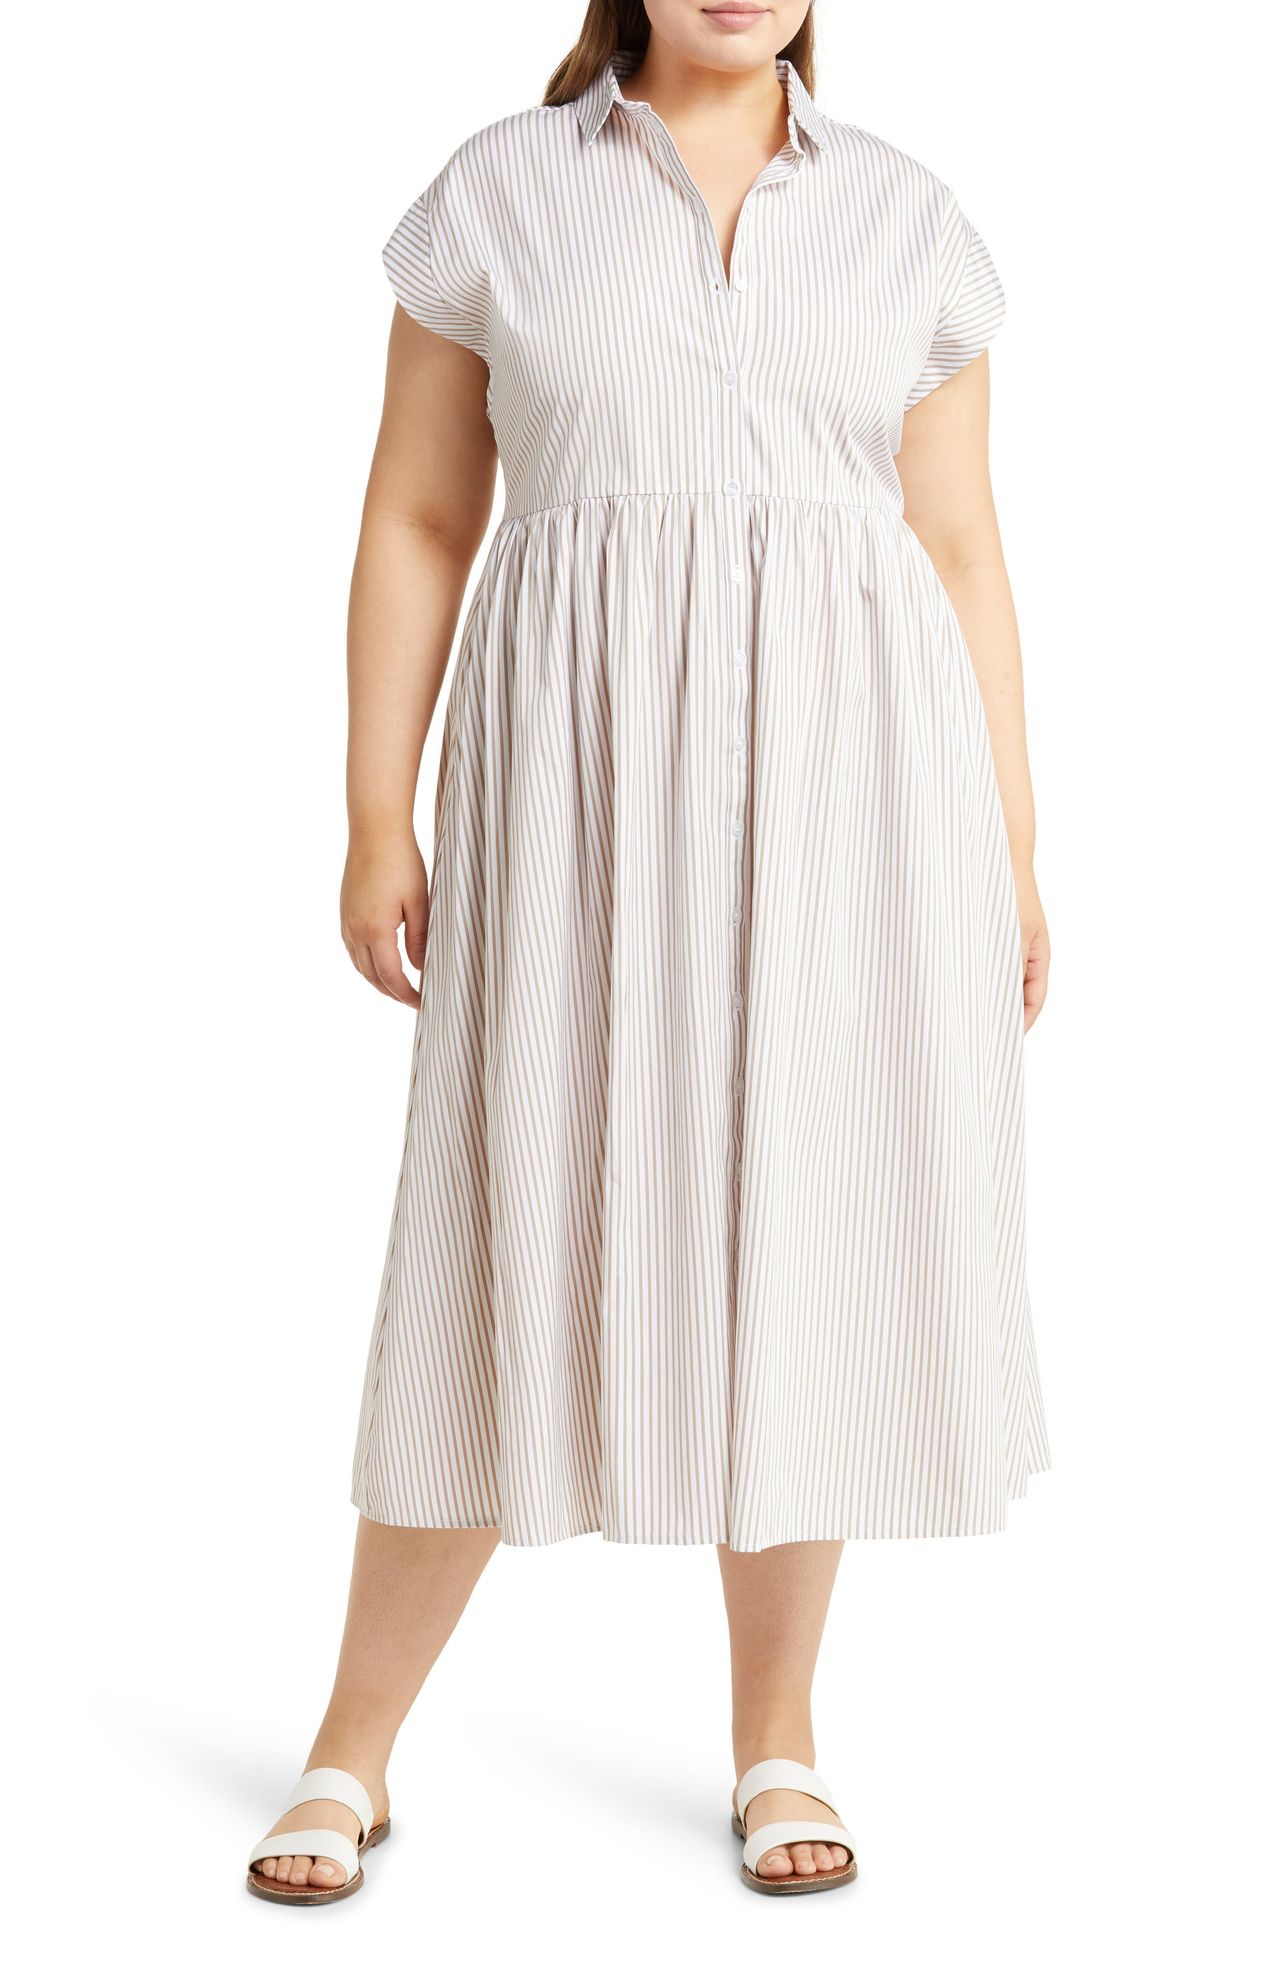 The 29 Best Casual Plus-Size Dresses in Up to a Size 4X | Who What Wear